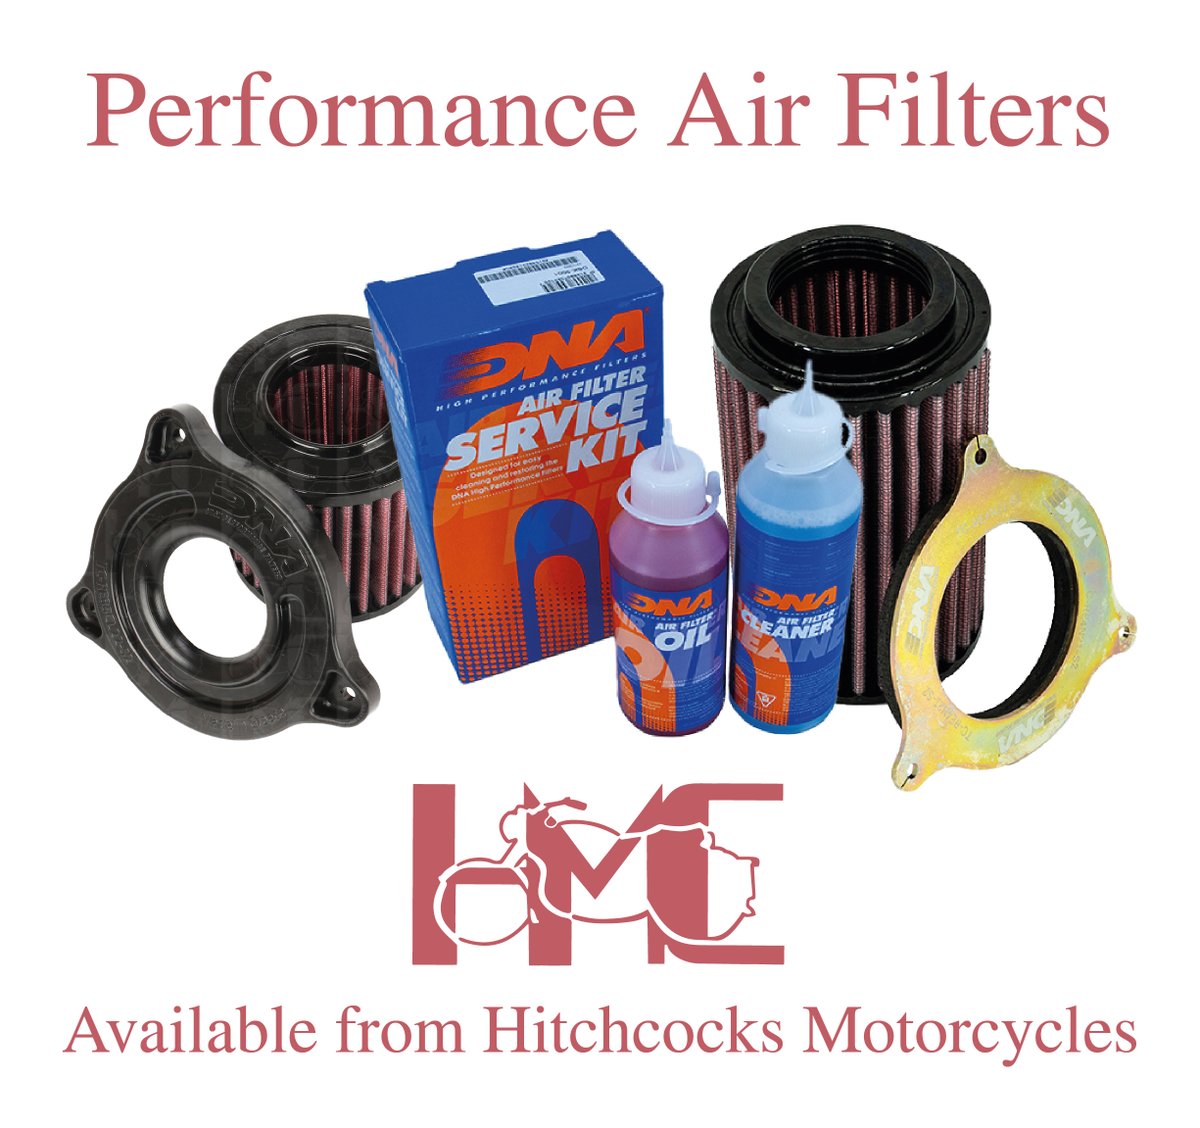 Performance Air Filters for Royal Enfield Motorcycles. #RoyalEnfield #hunter #motorcycleairfilters #interceptor #meteor #bullet #himalayan #motorcycleaccessories #continentalGT #performancekits #classic350 #scram #royalenfieldmeteor #airfilters #dnafilters #supermeteor #motorbike